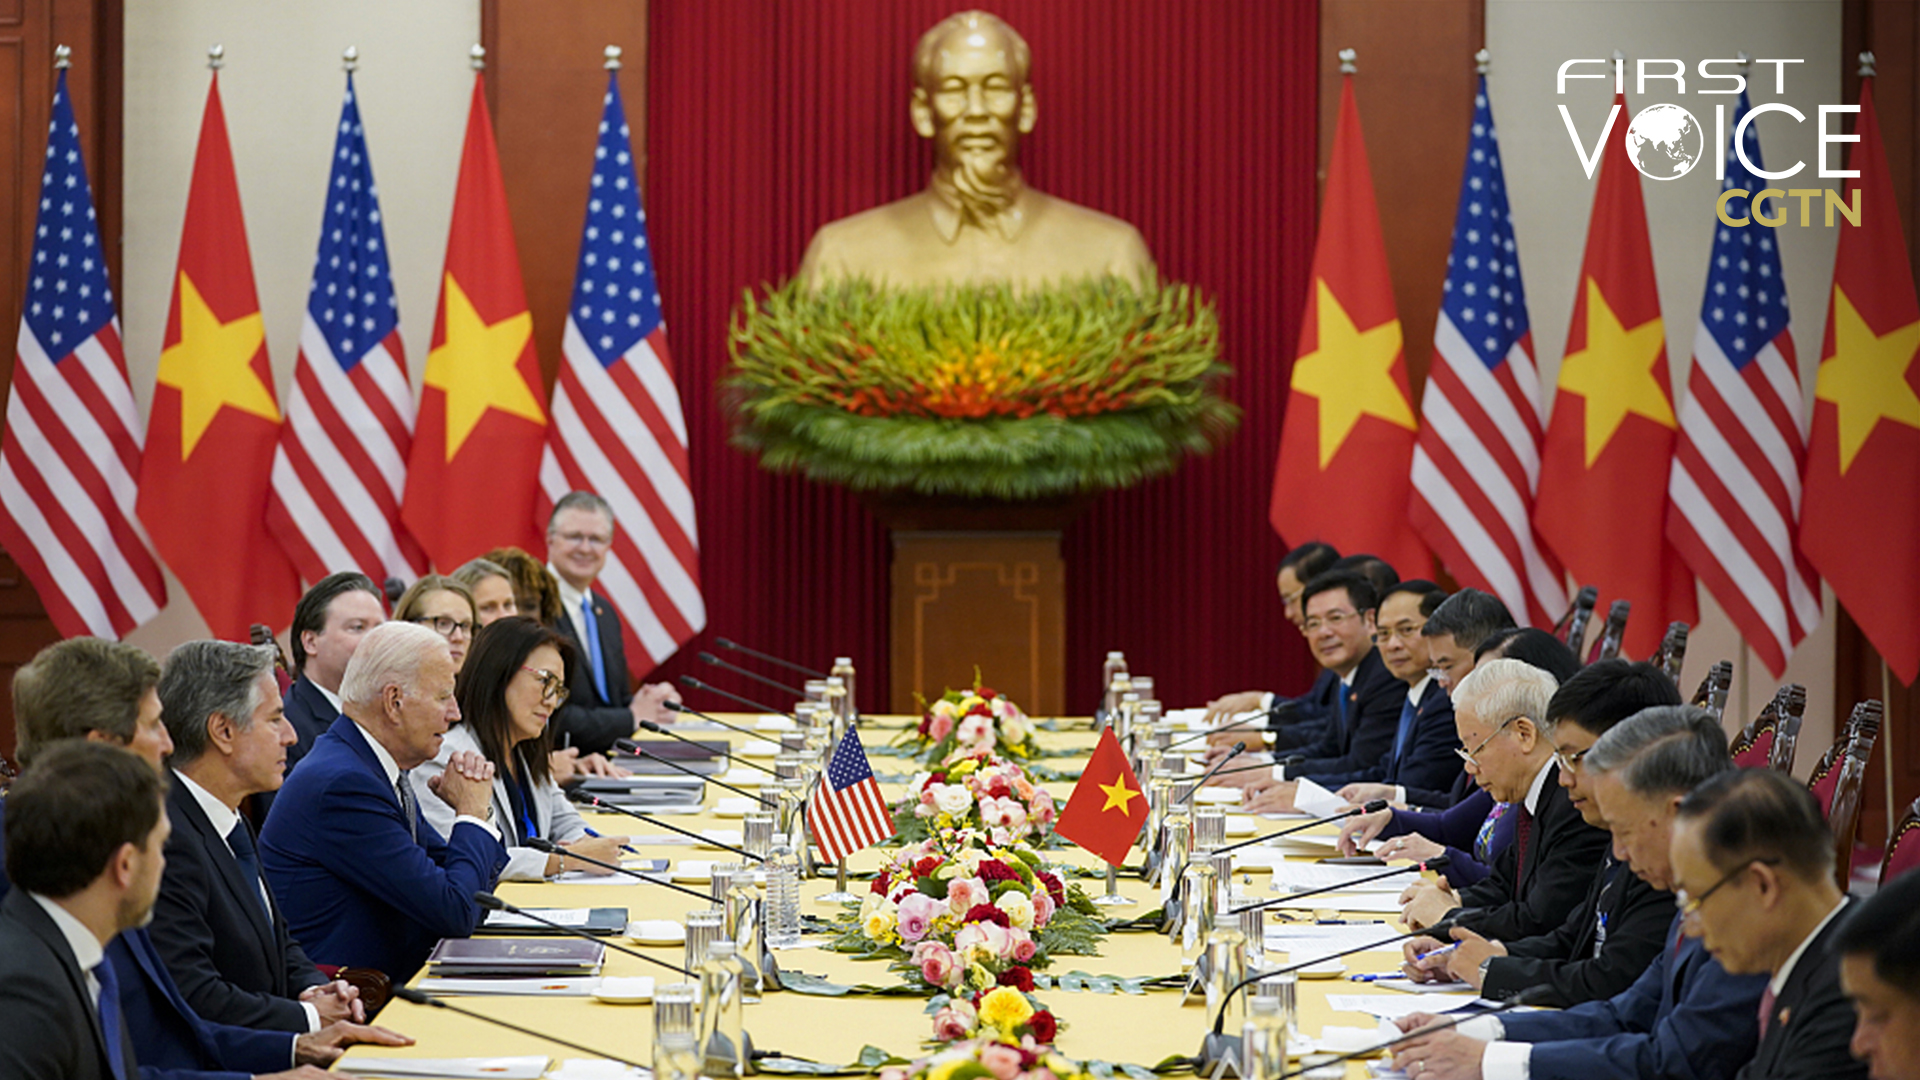 U.S. President Joe Biden (L) participates in a meeting with General Secretary of the Communist Party of Vietnam Central Committee (CPVCC) Nguyen Phu Trong (R) at the Communist Party of Vietnam Headquarters, in Hanoi, Vietnam, September 10, 2023. /CFP